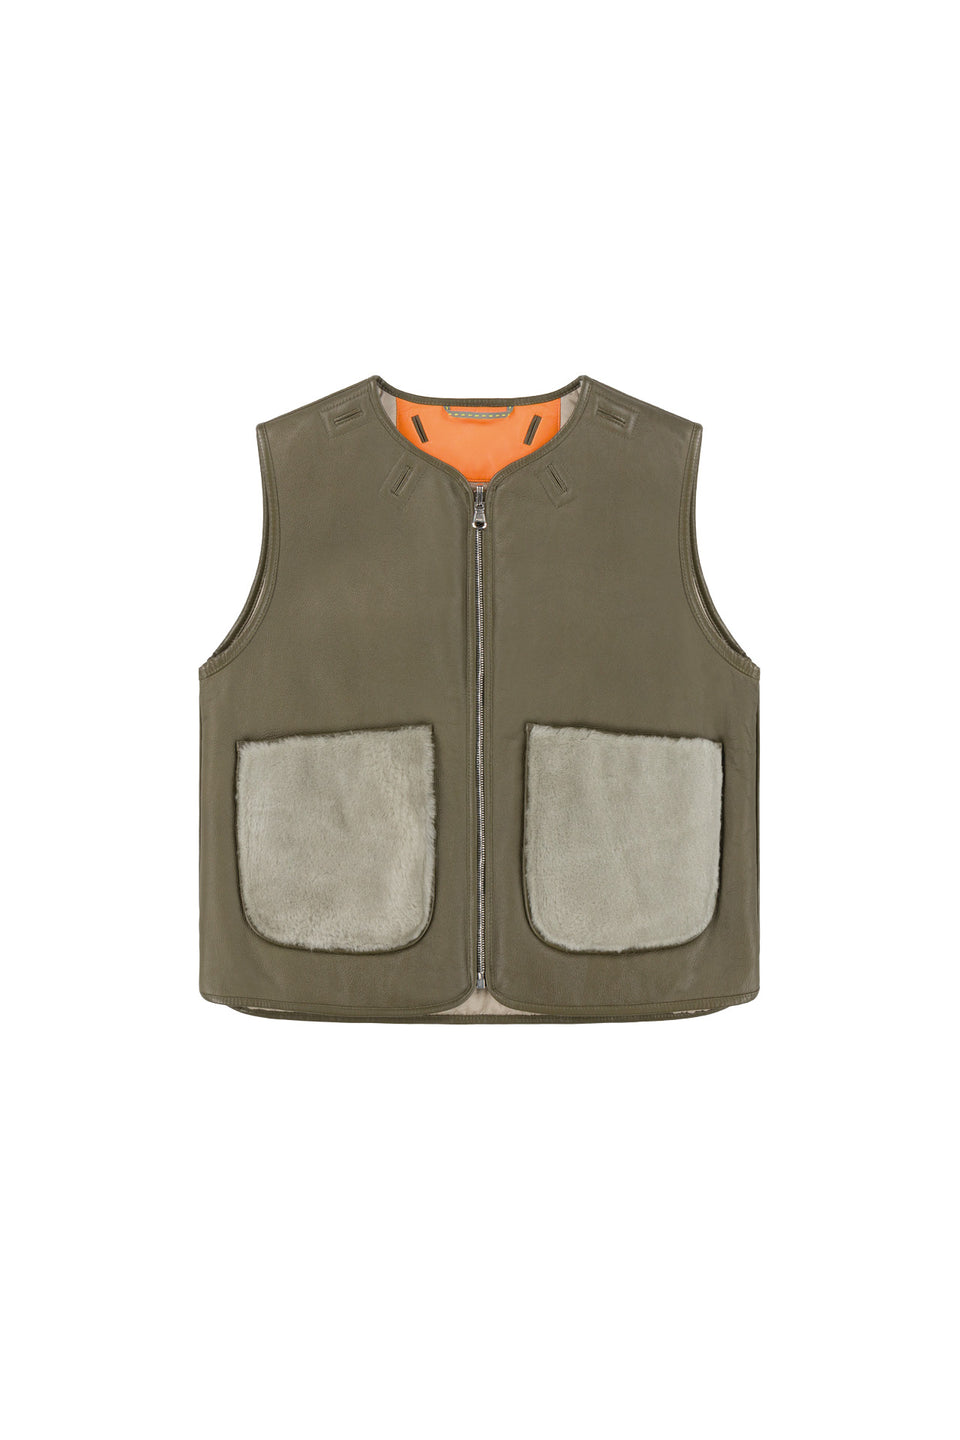 Cropped Aviator Shearling Vest - Dark Olive / Pale Jade (listing page thumbnail)